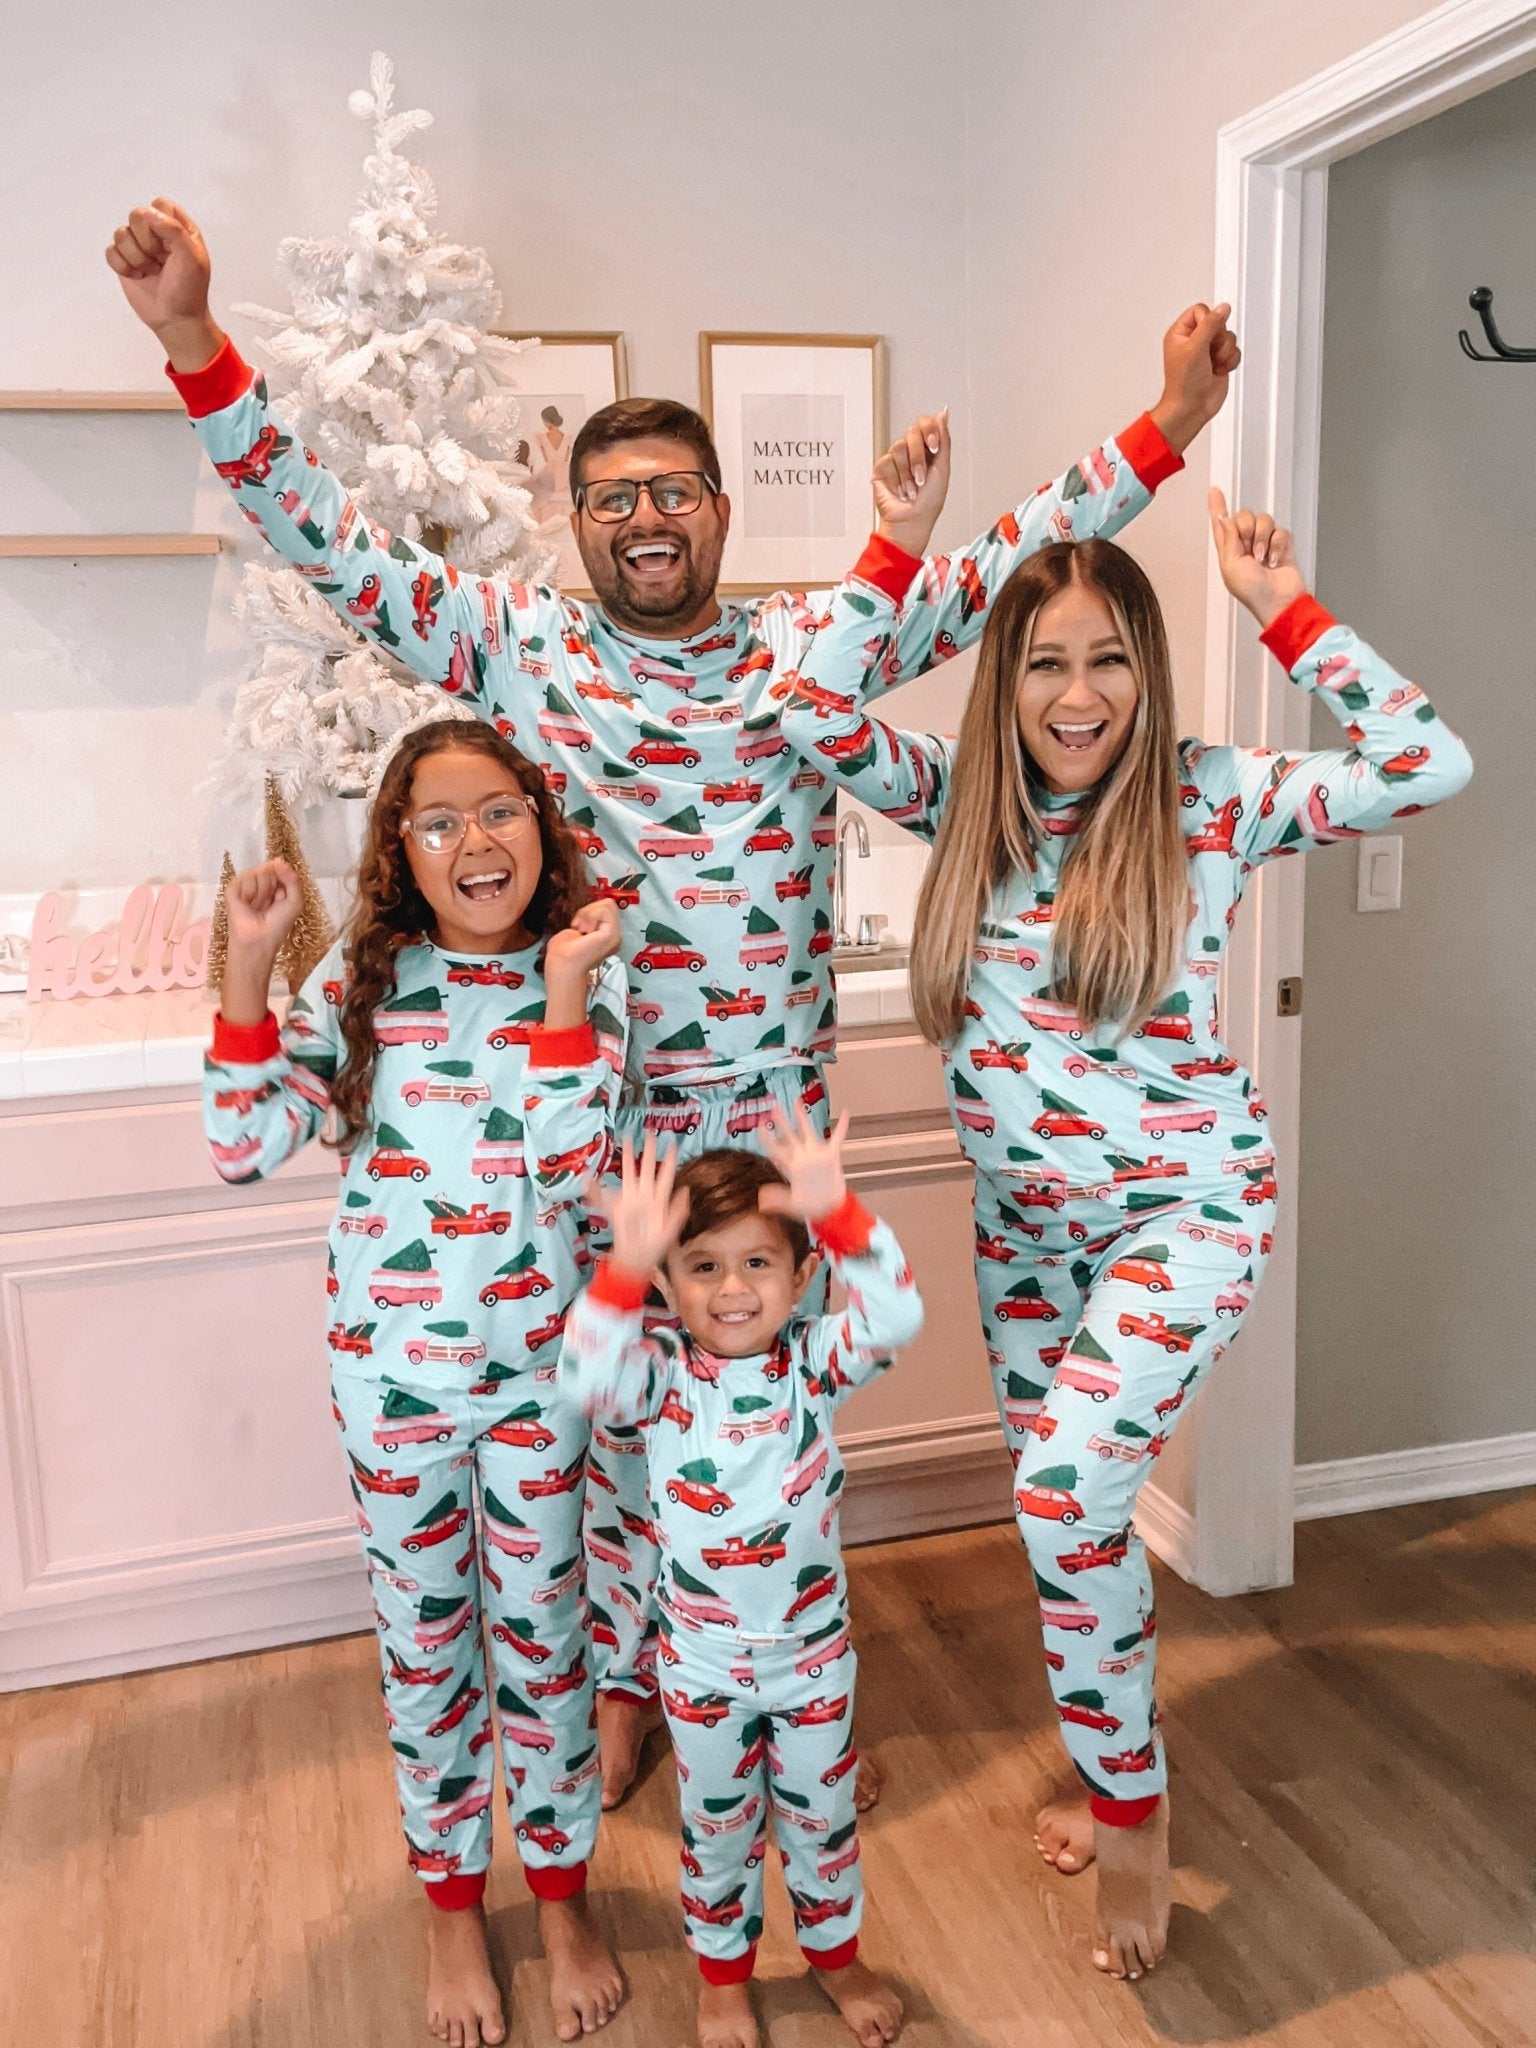 8 Matching Pajamas That Are Cozy and Fun For the Whole Family